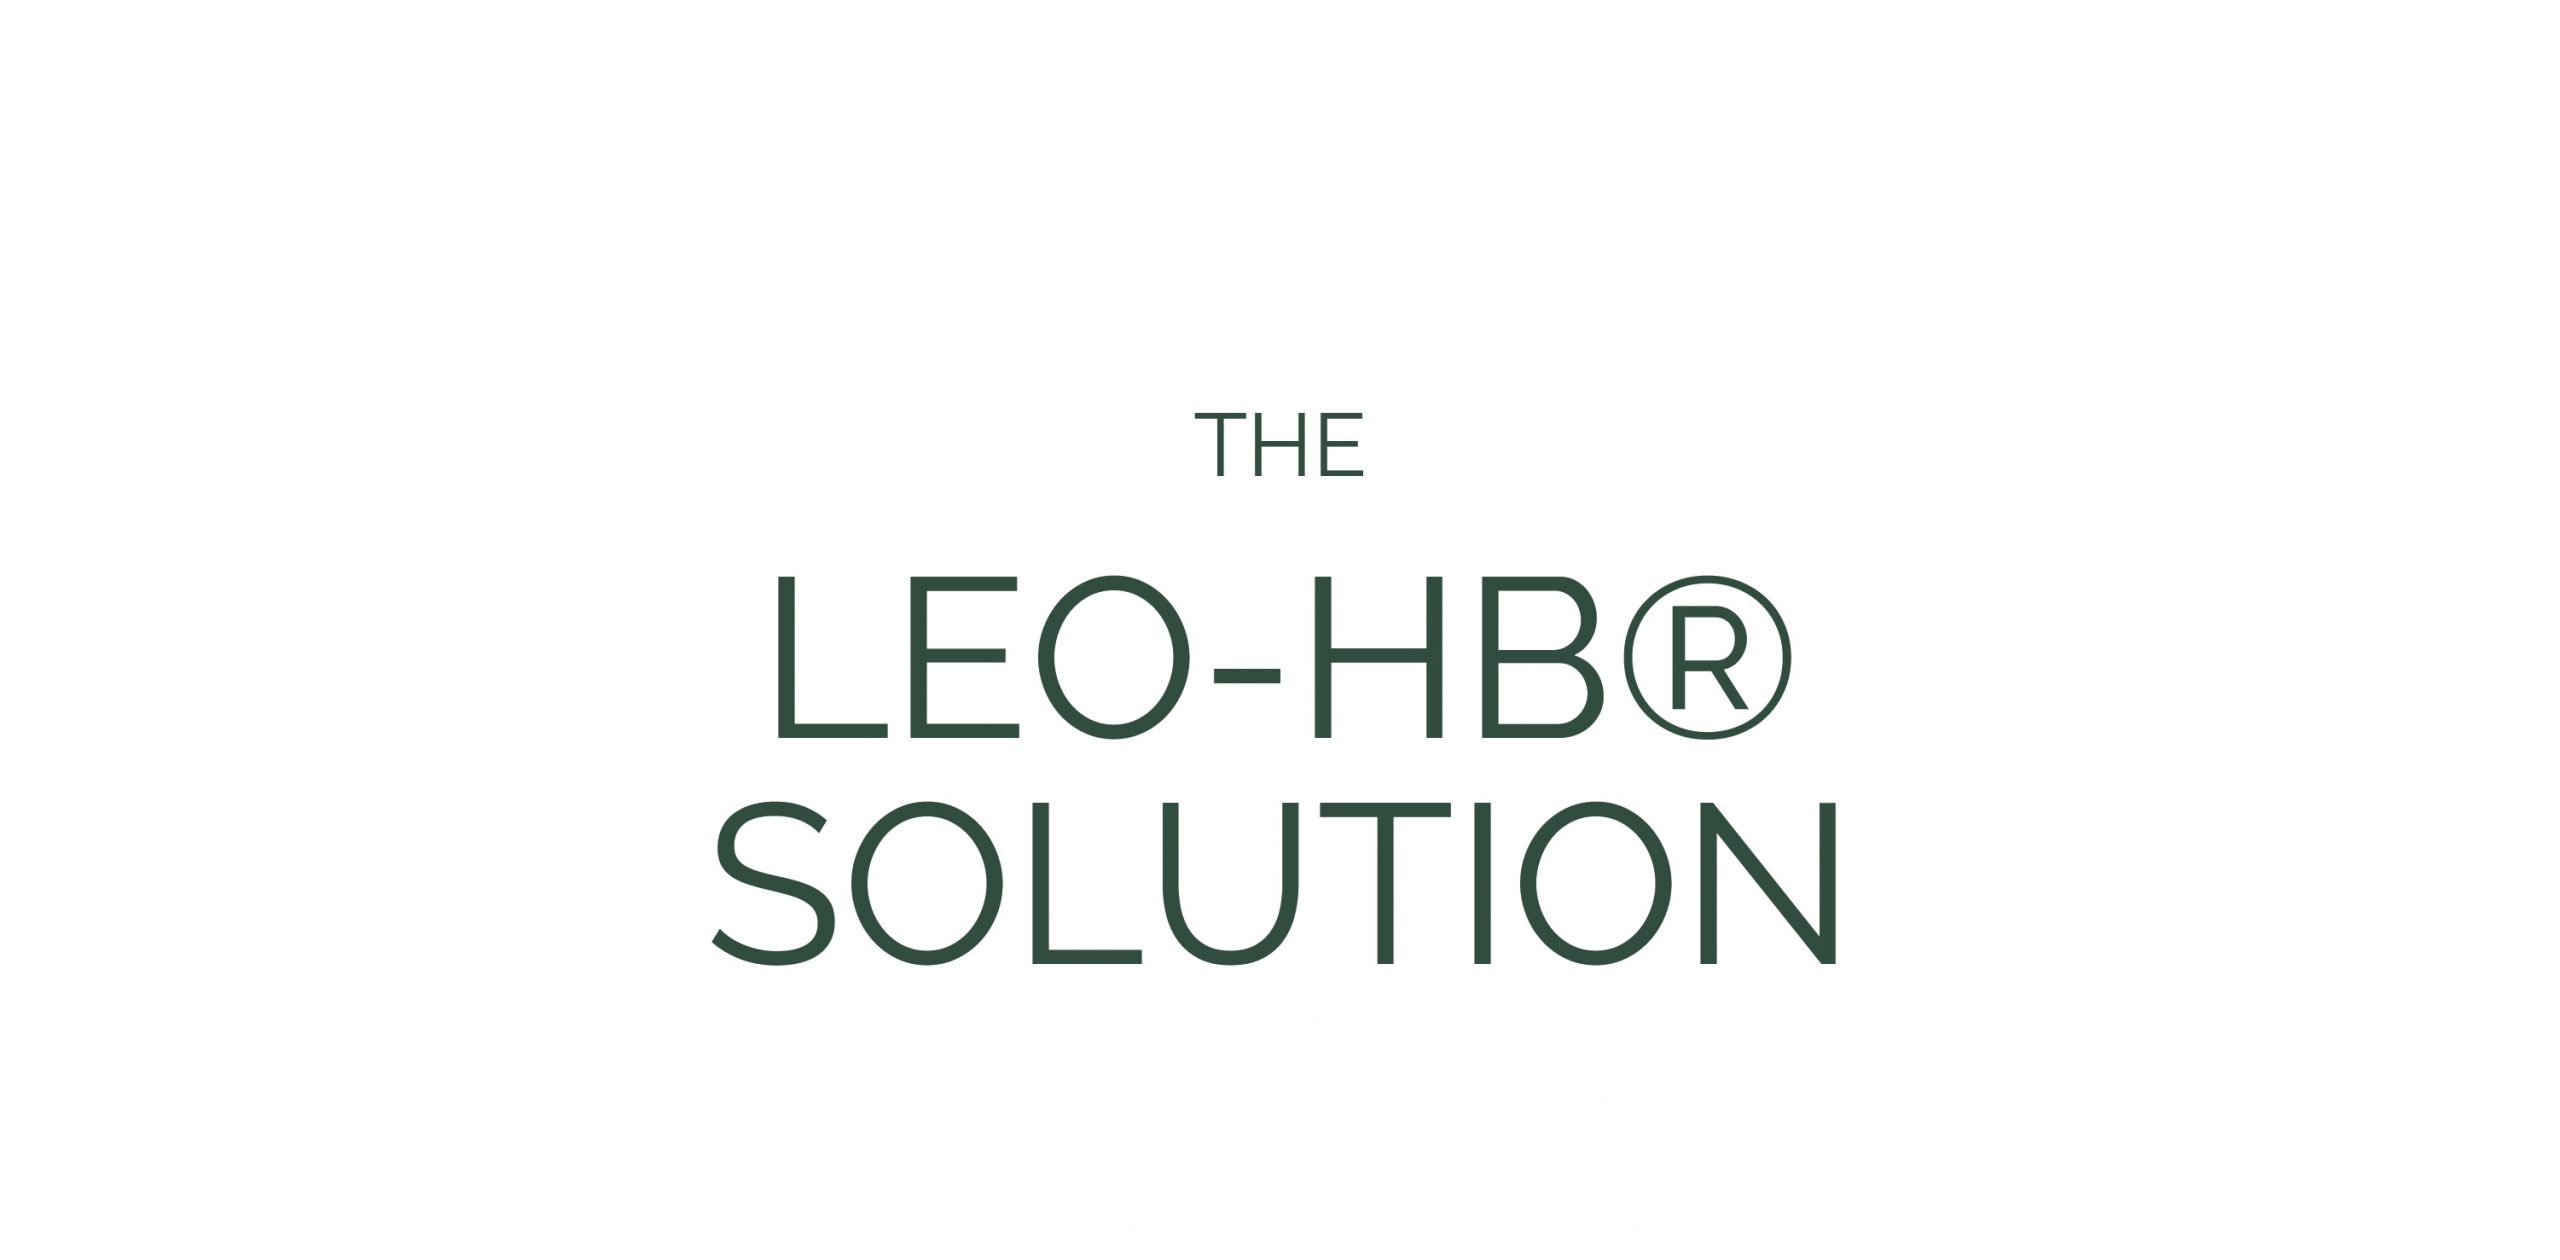 The LEO-HB® Solution